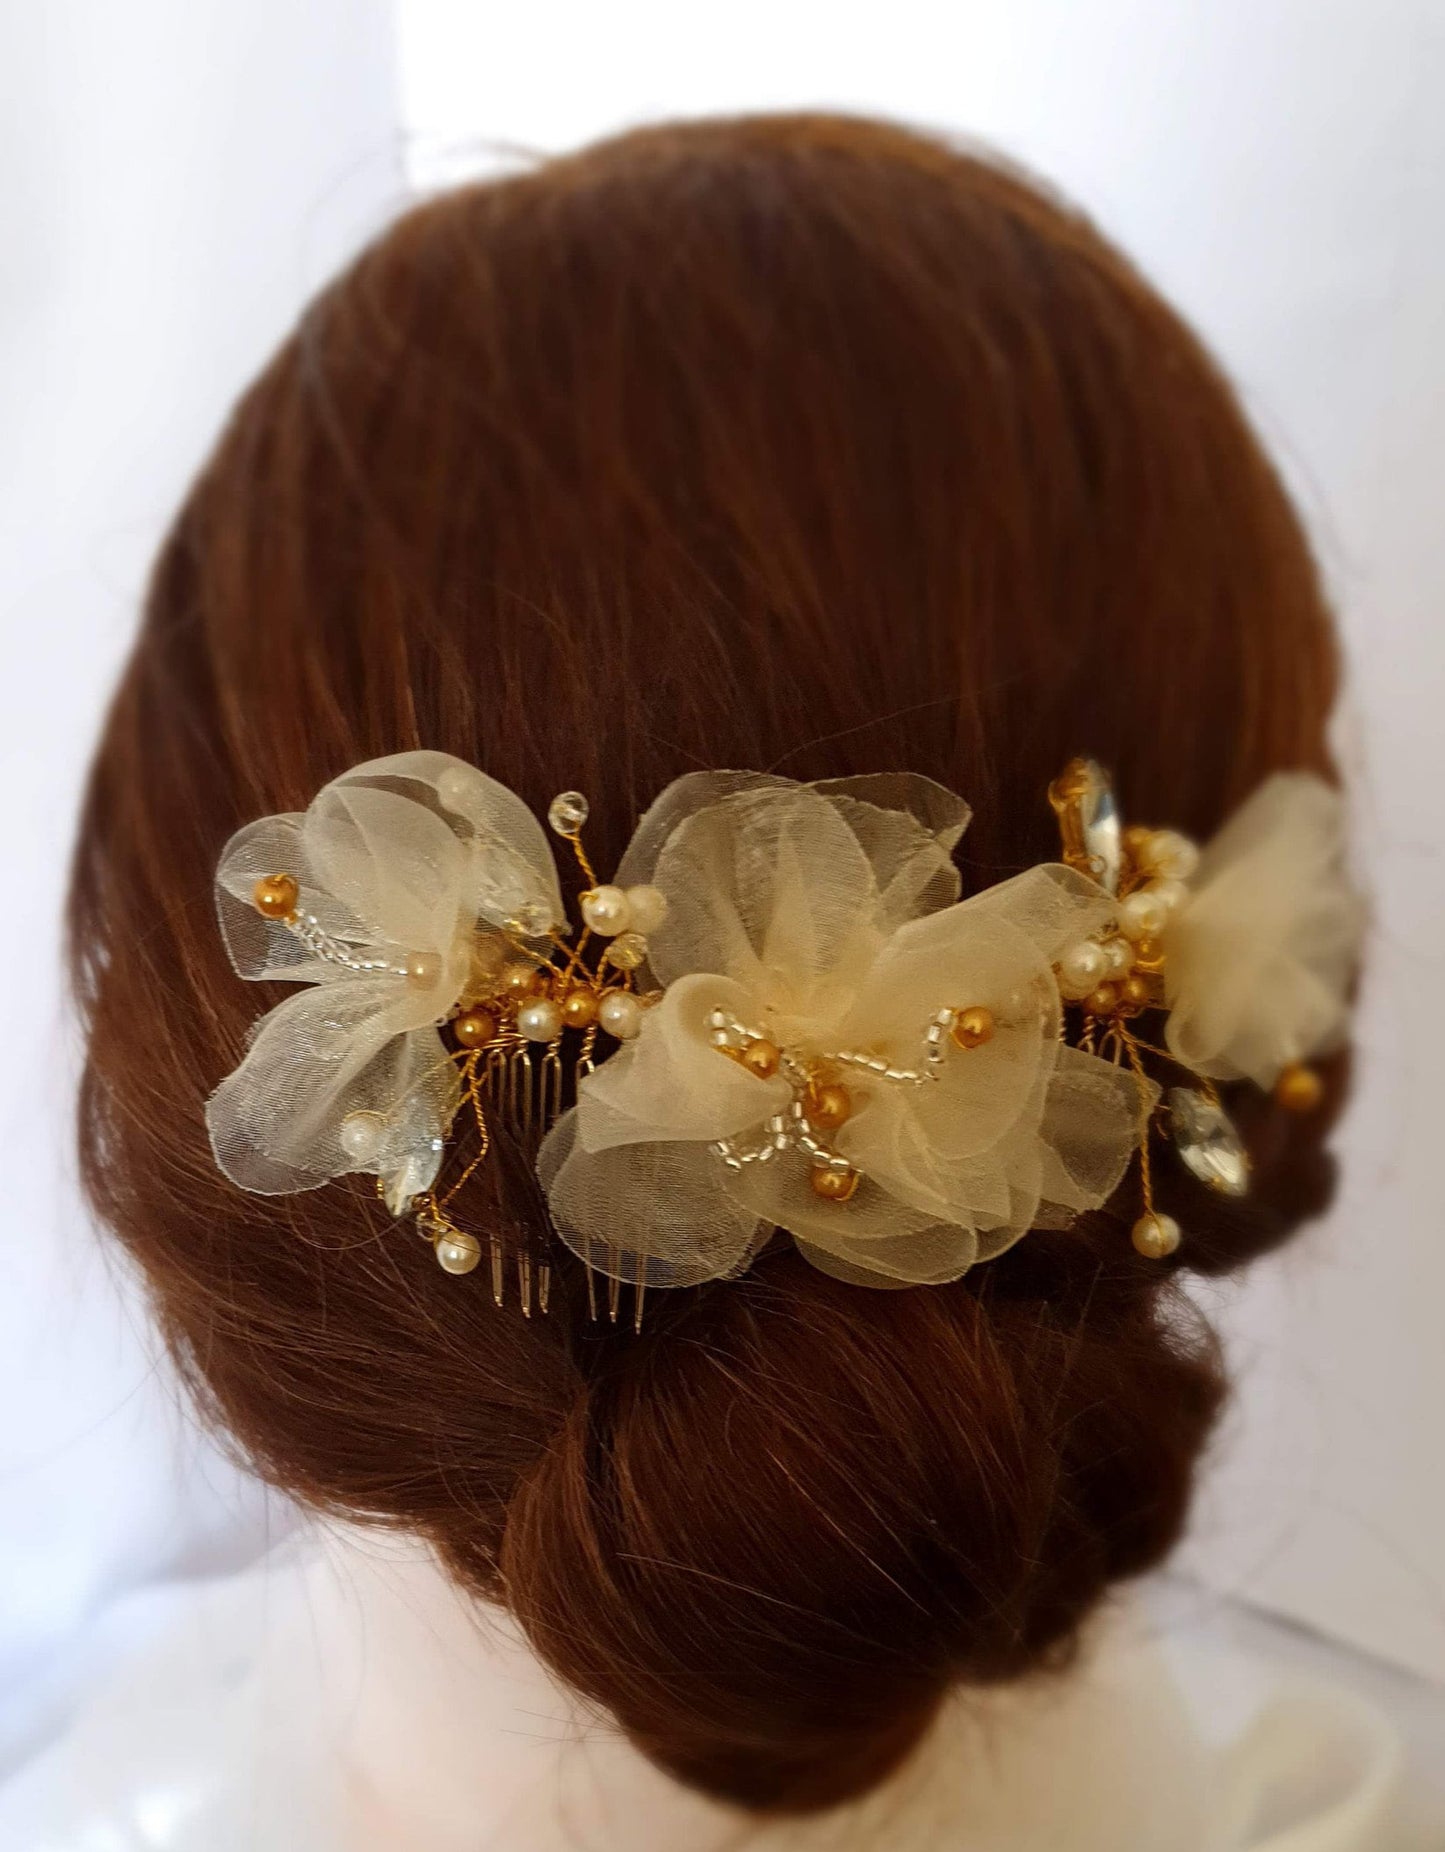 Handmade bridal comb with pearls, drop stones and organza silk flowers - hair accessory for weddings, gold-colored metal Comb